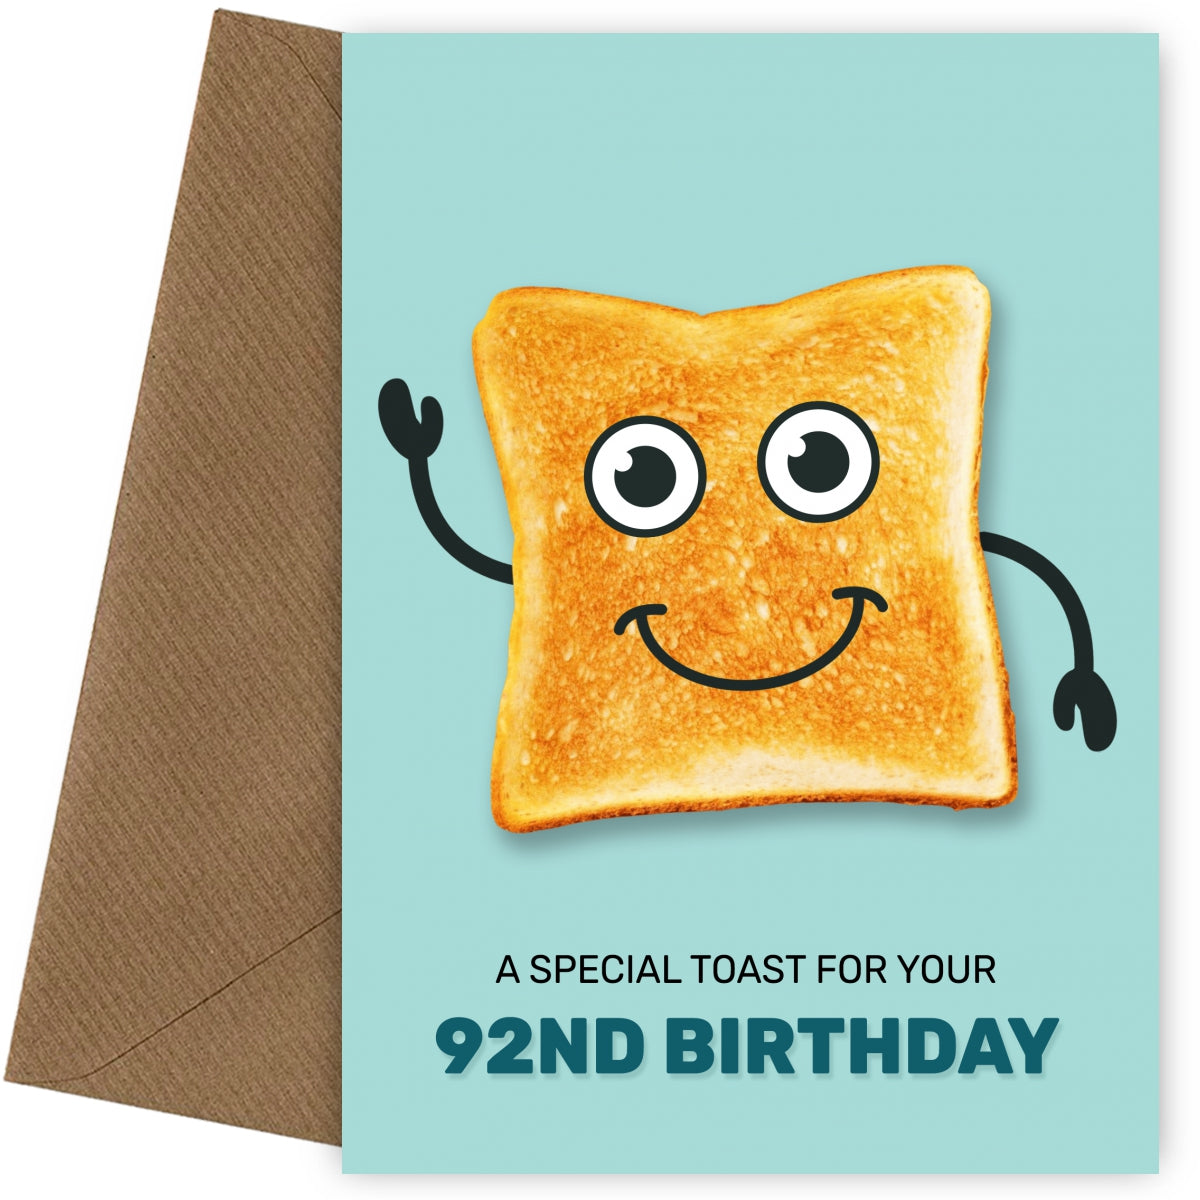 Funny 92nd Birthday Card for Men and Women - Humorous Birthday Toast